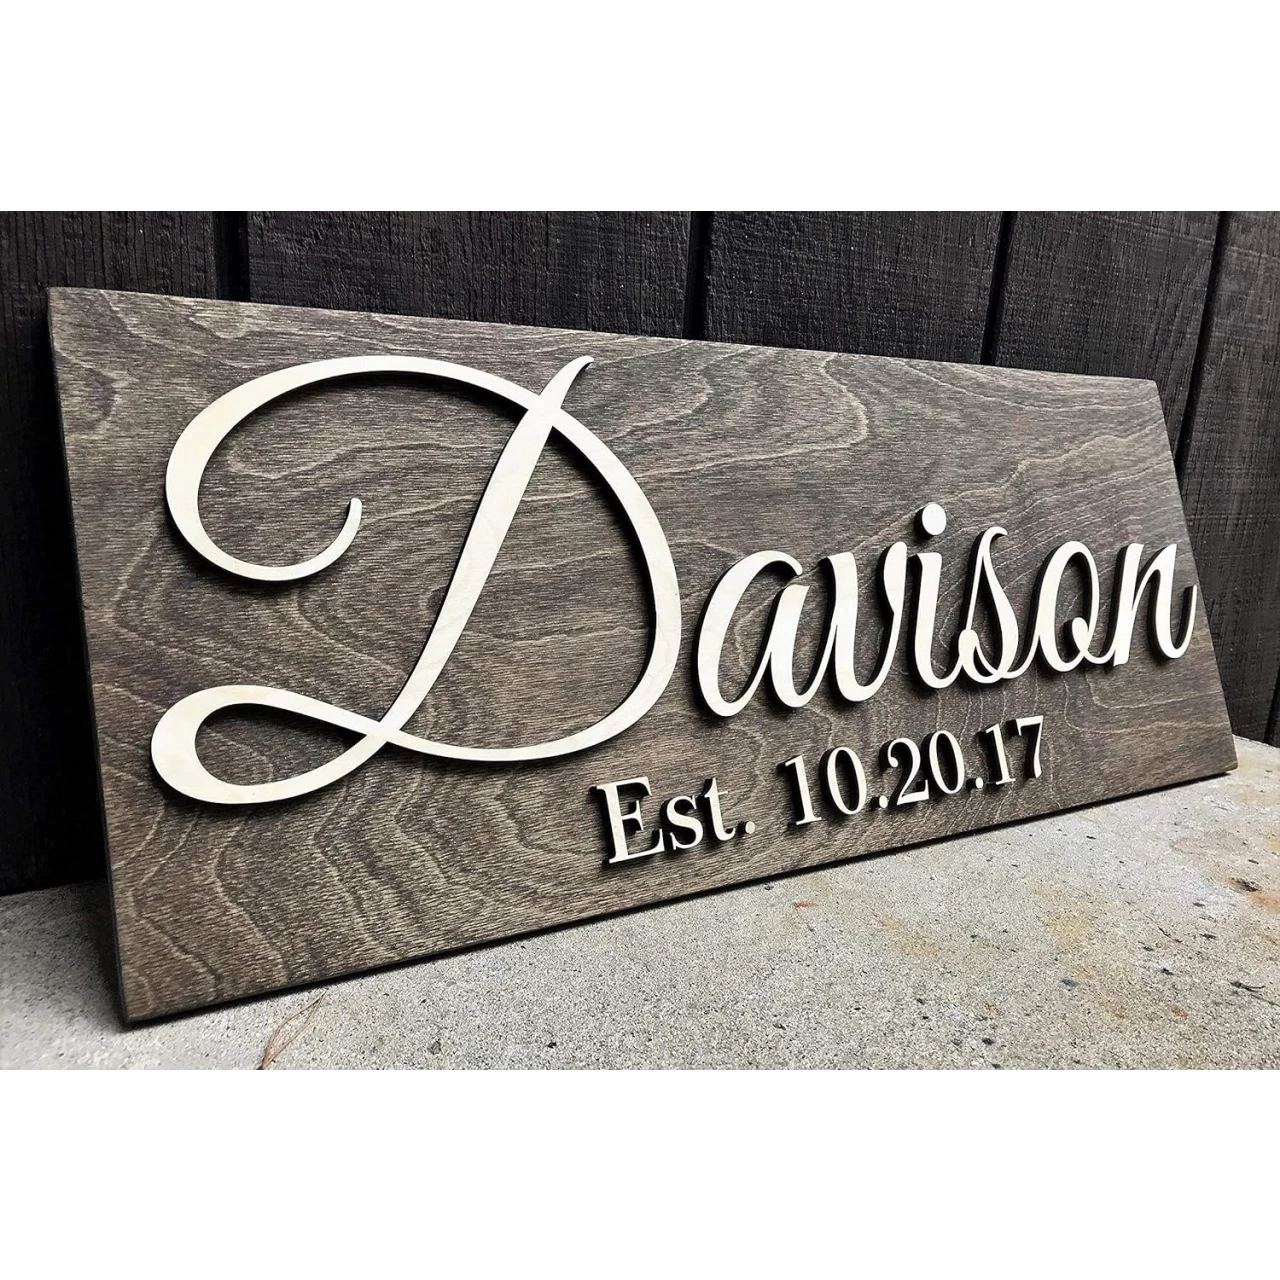 Custom Wood Sign Personalized Wedding Gift Wood Wall Art Personalized Sign Last Name Sign Established Sign Wooden Signs Bridal Shower Gift Anniversary Gift